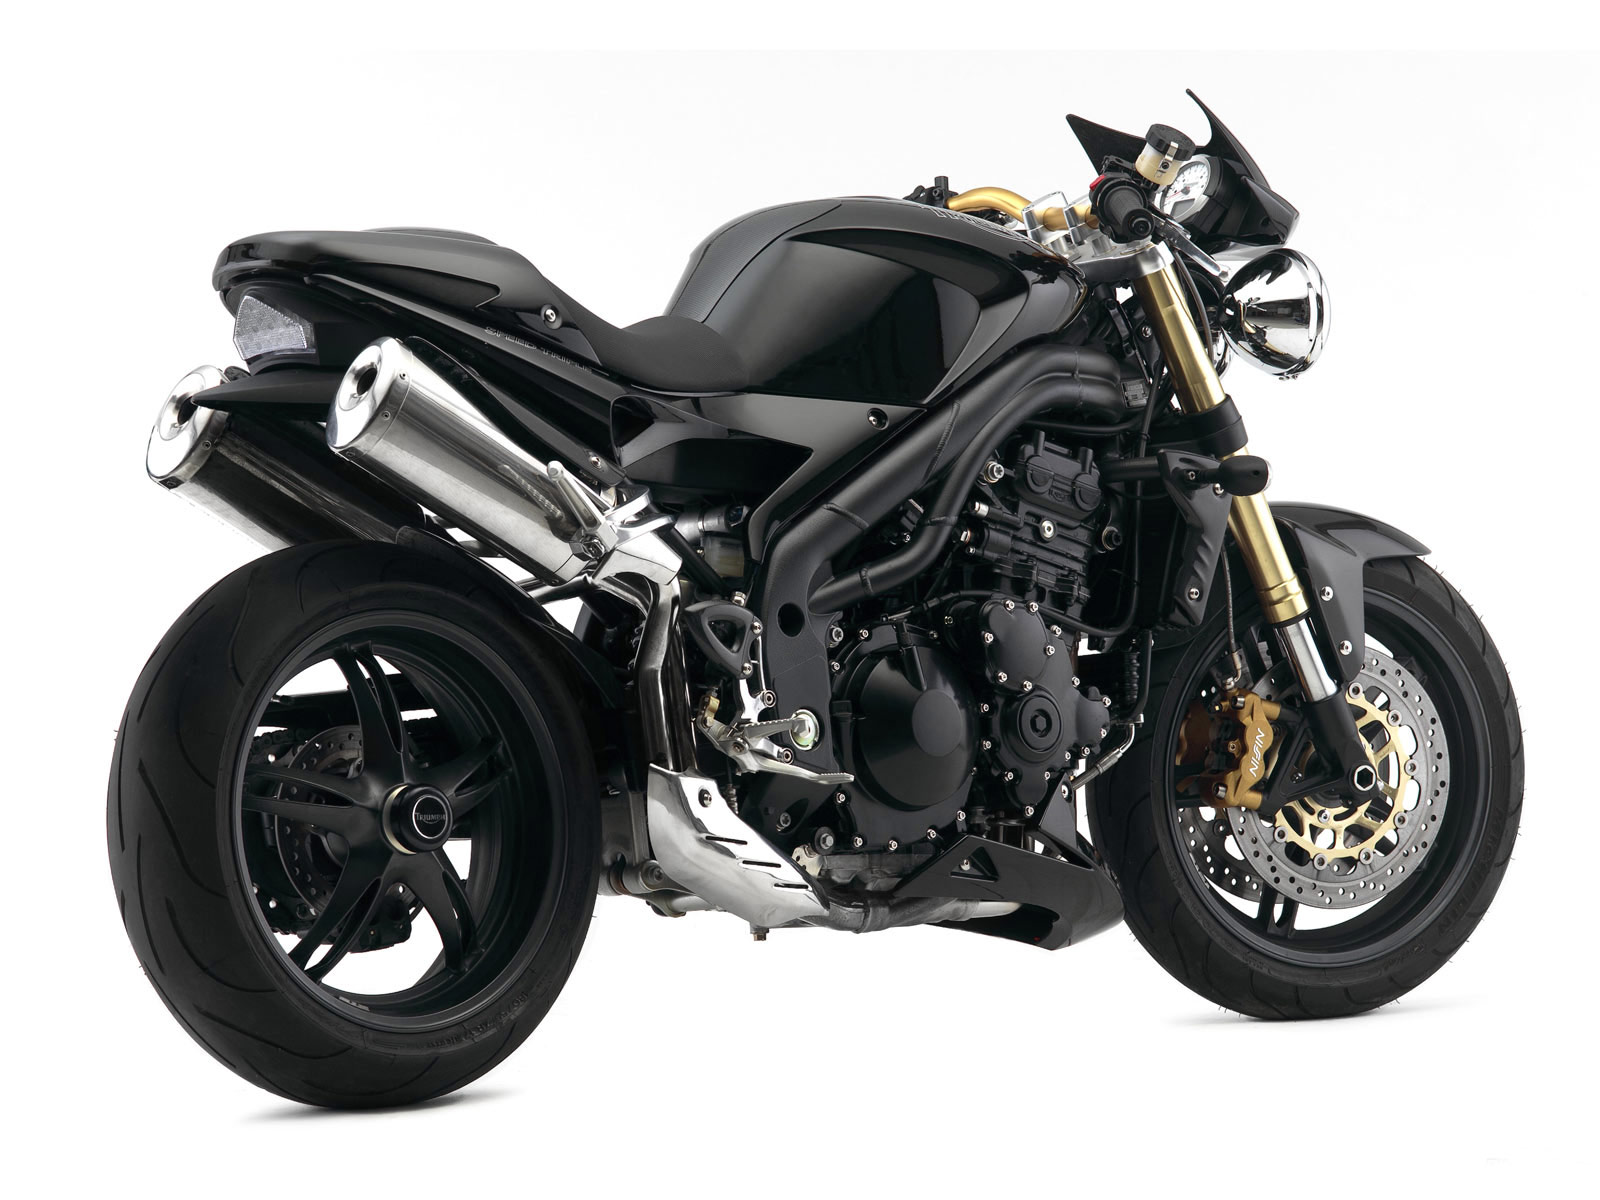 2007 TRIUMPH Speed Triple Motorcycle Photos and specifications